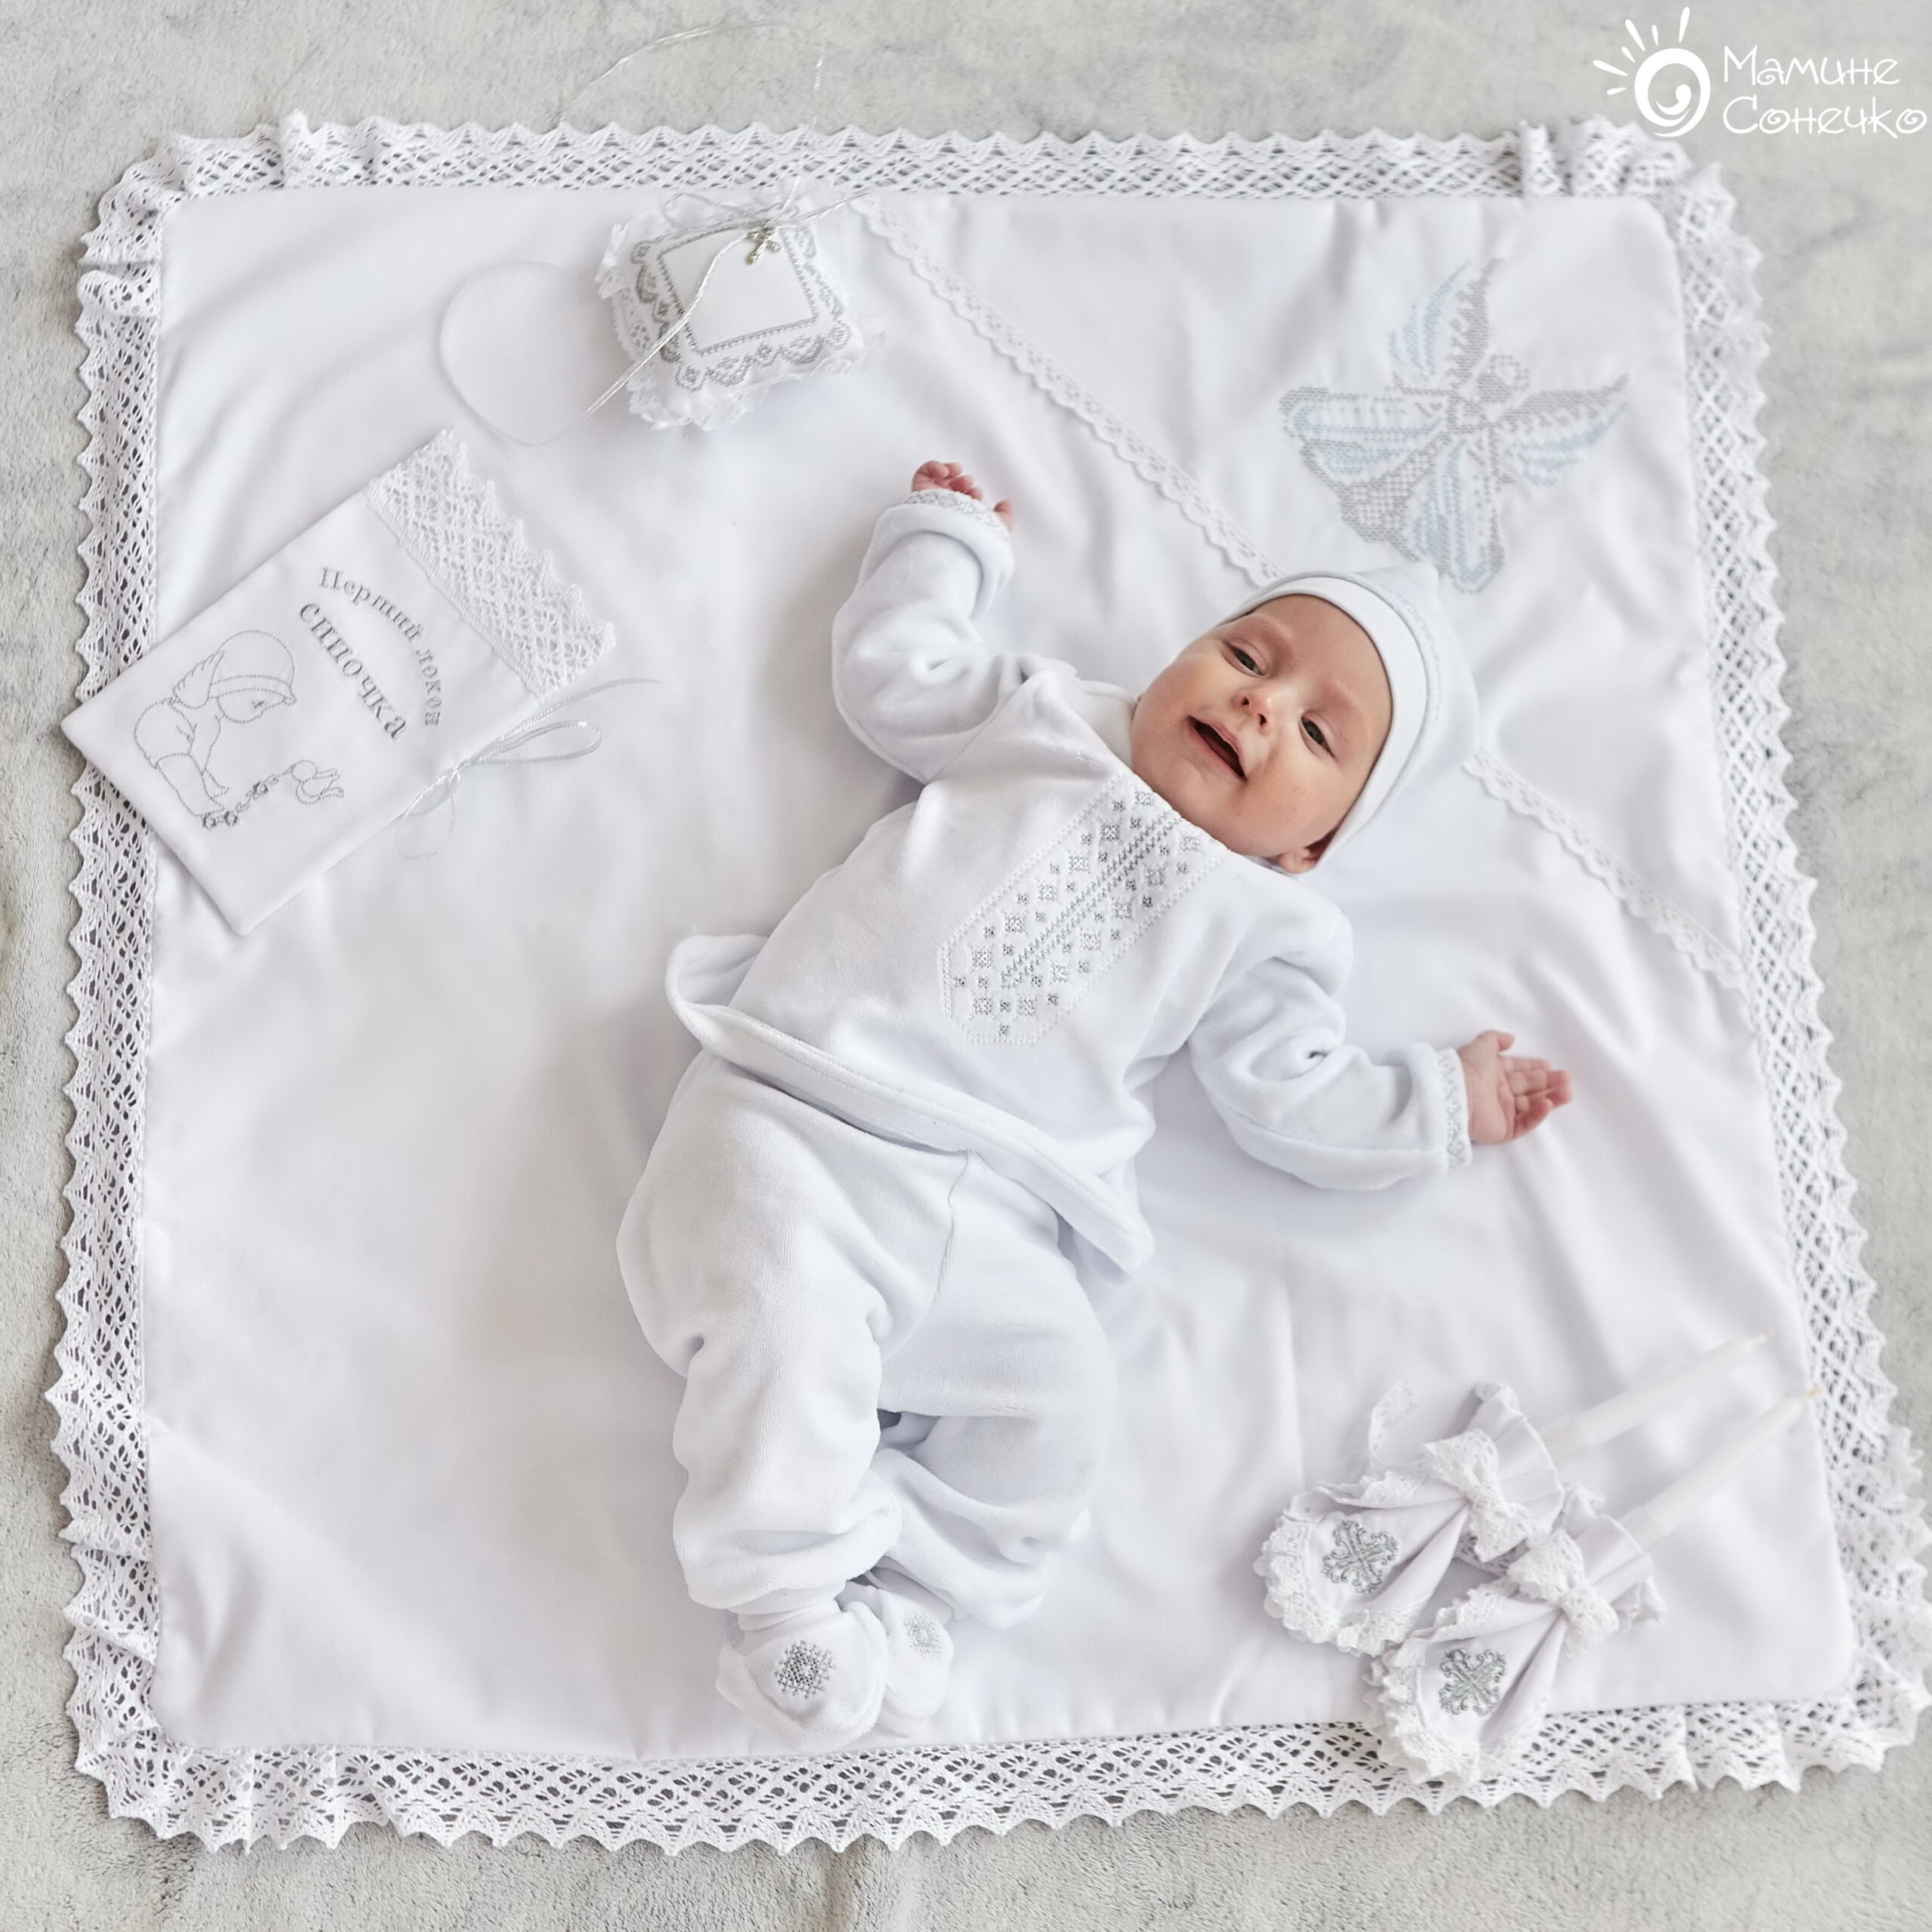 Complete set for baptism of a boy “Galician” silver, velour